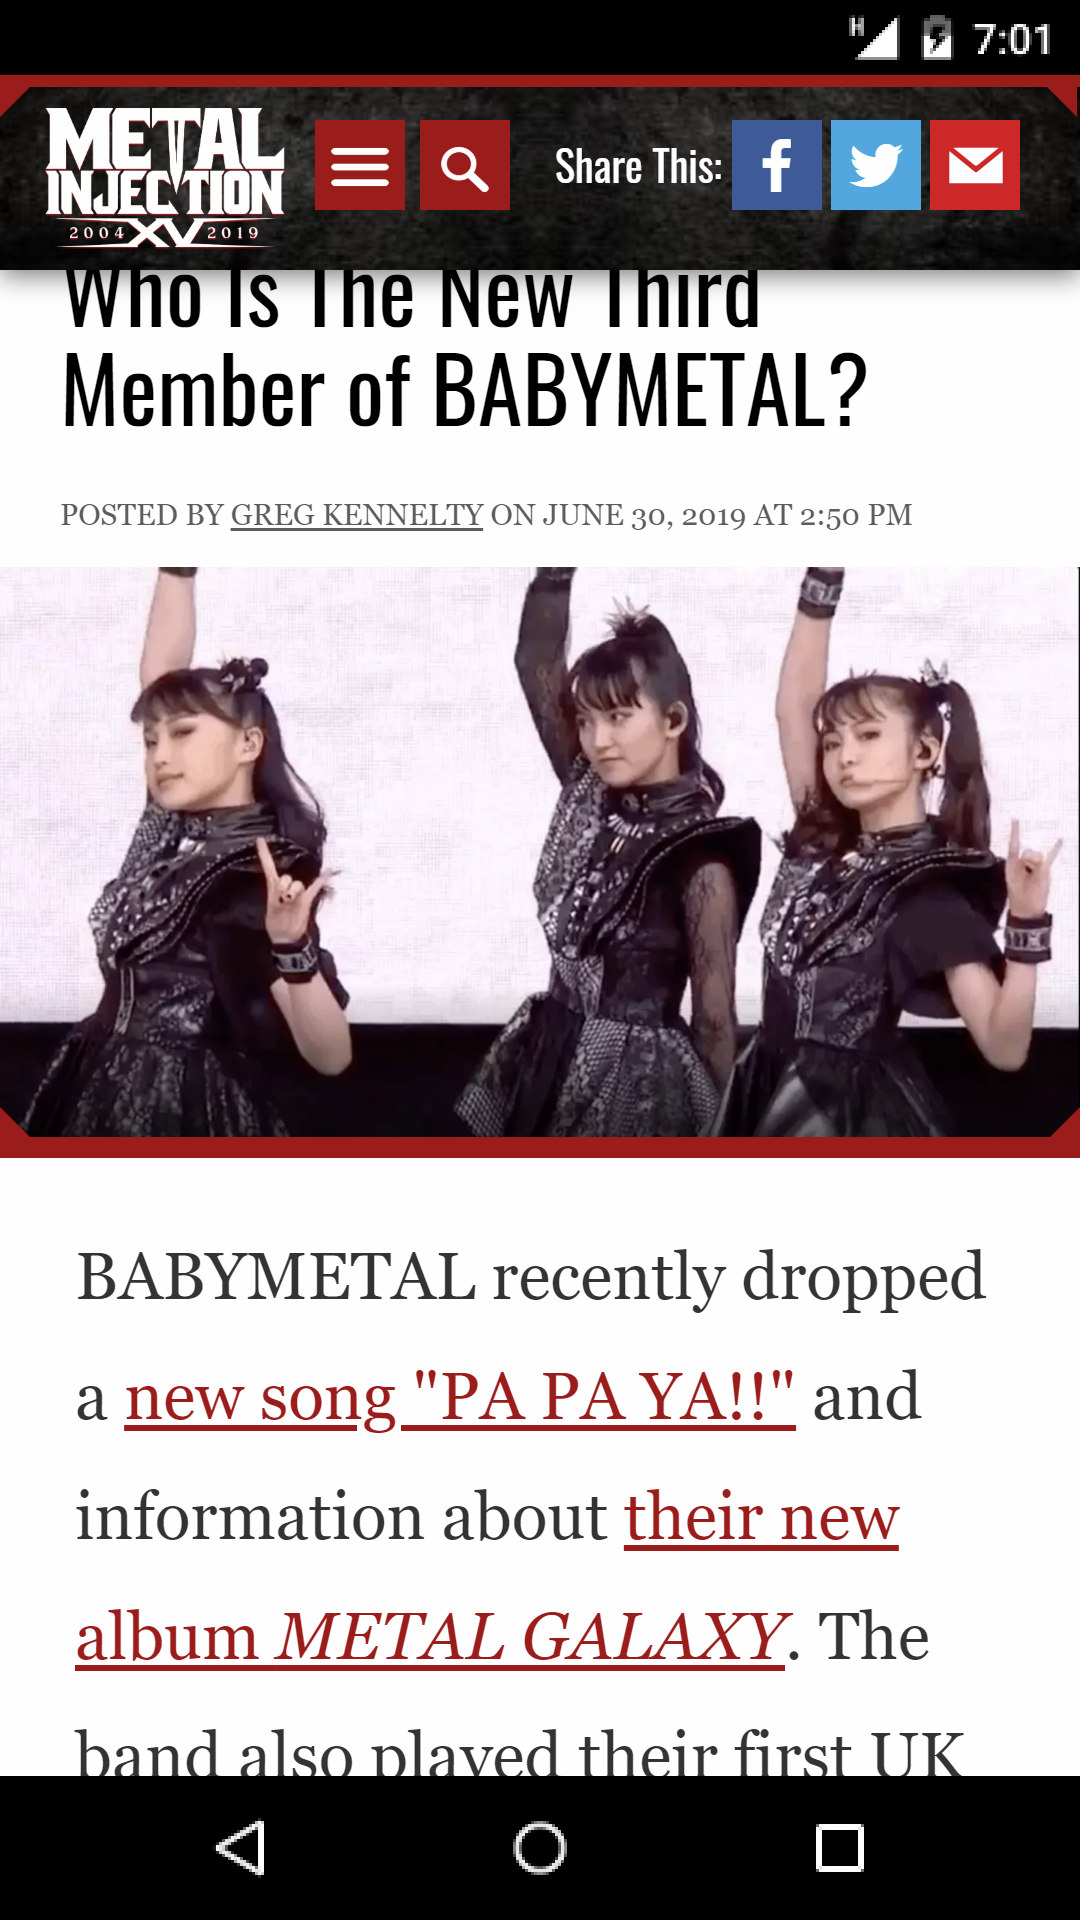 http://www.mybitchisajunky.com/whg/picture/metalinjection.net_latest-news_rumors_who-is-the-new-third-member-of-babymetal%28Nexus%205%29.png